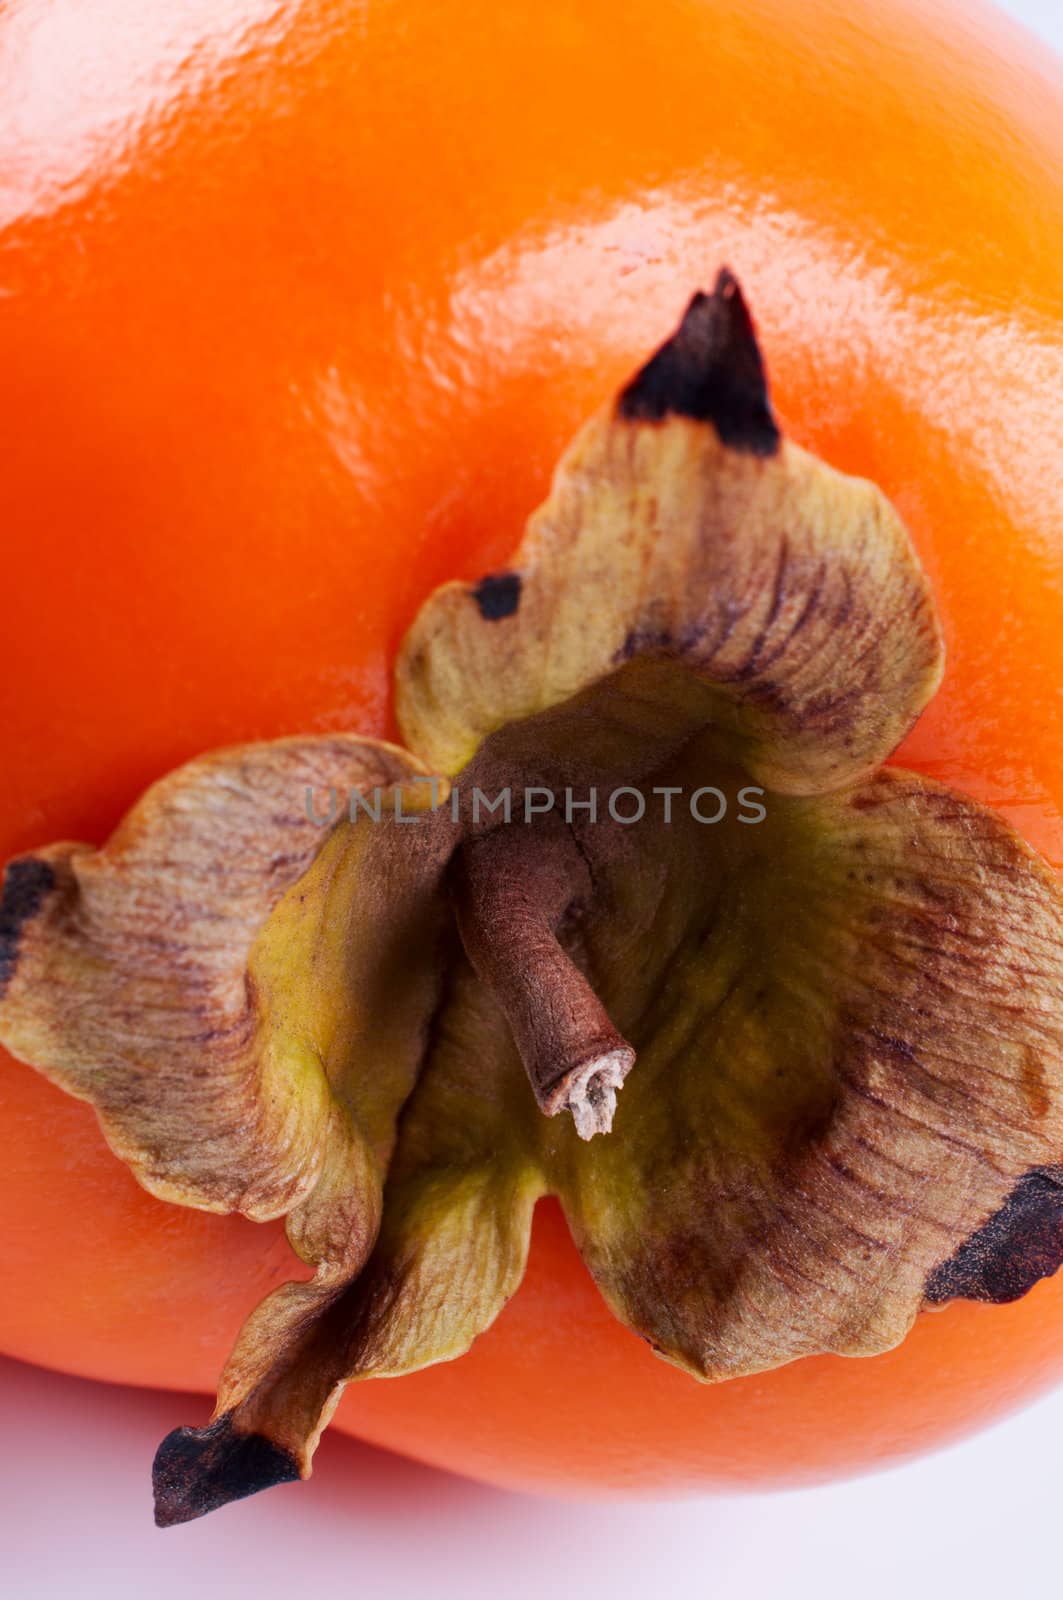 Persimmon on white background close up